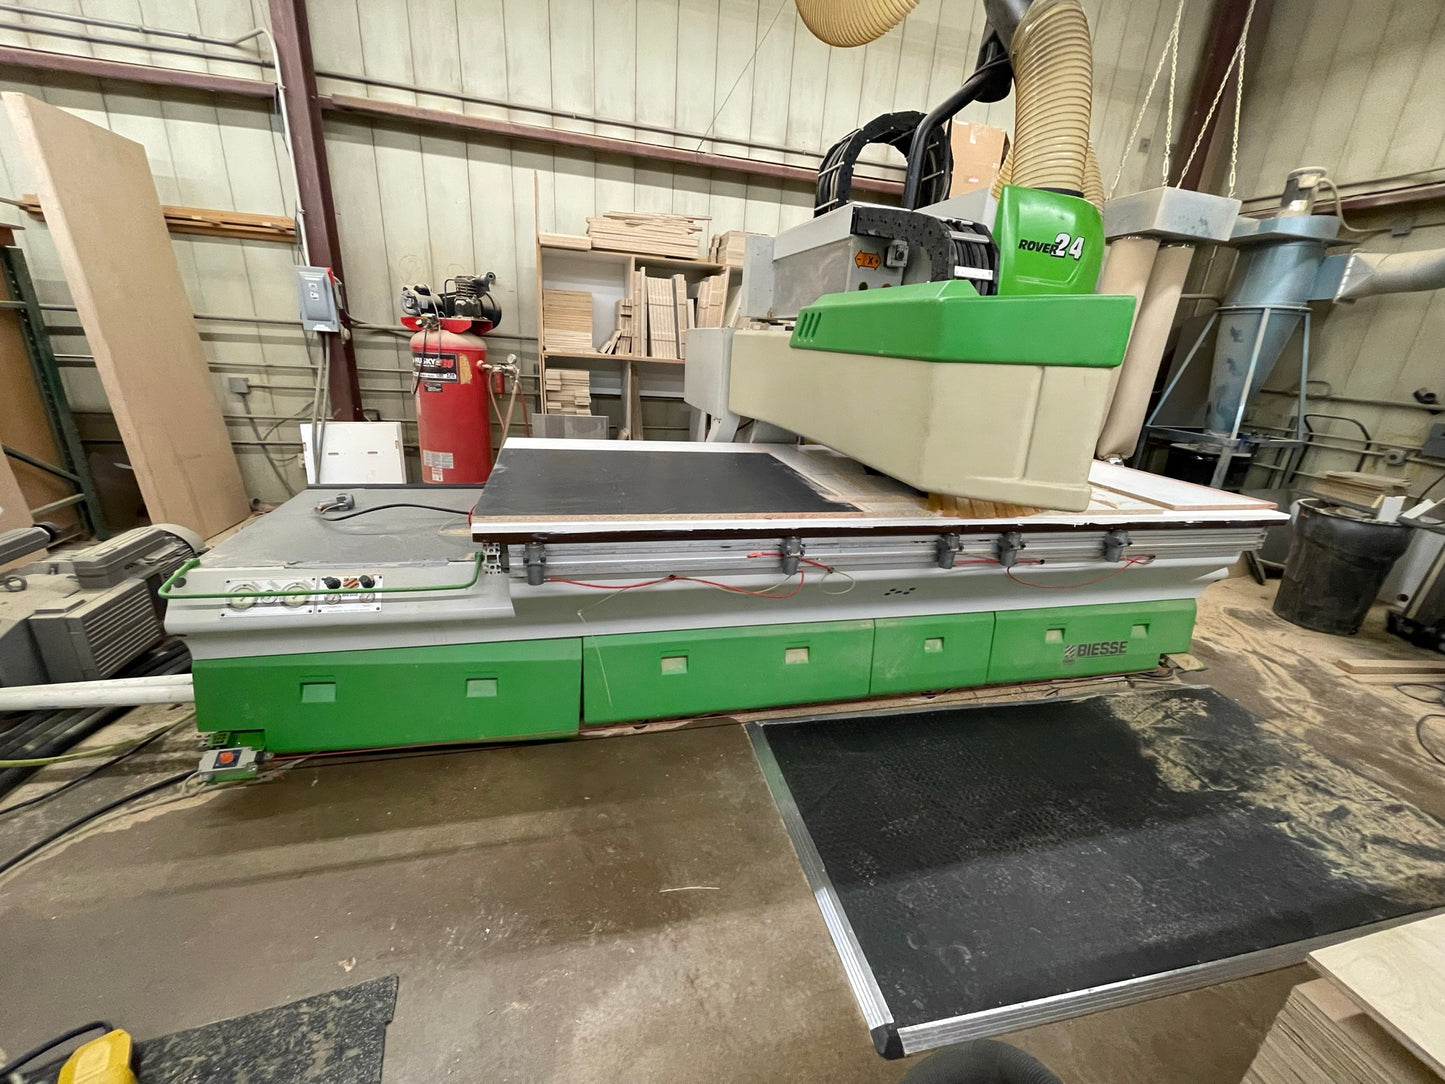 2001 Biesse Rover 24 FTS CNC Router 4x10 with Becker Pump - Illinois